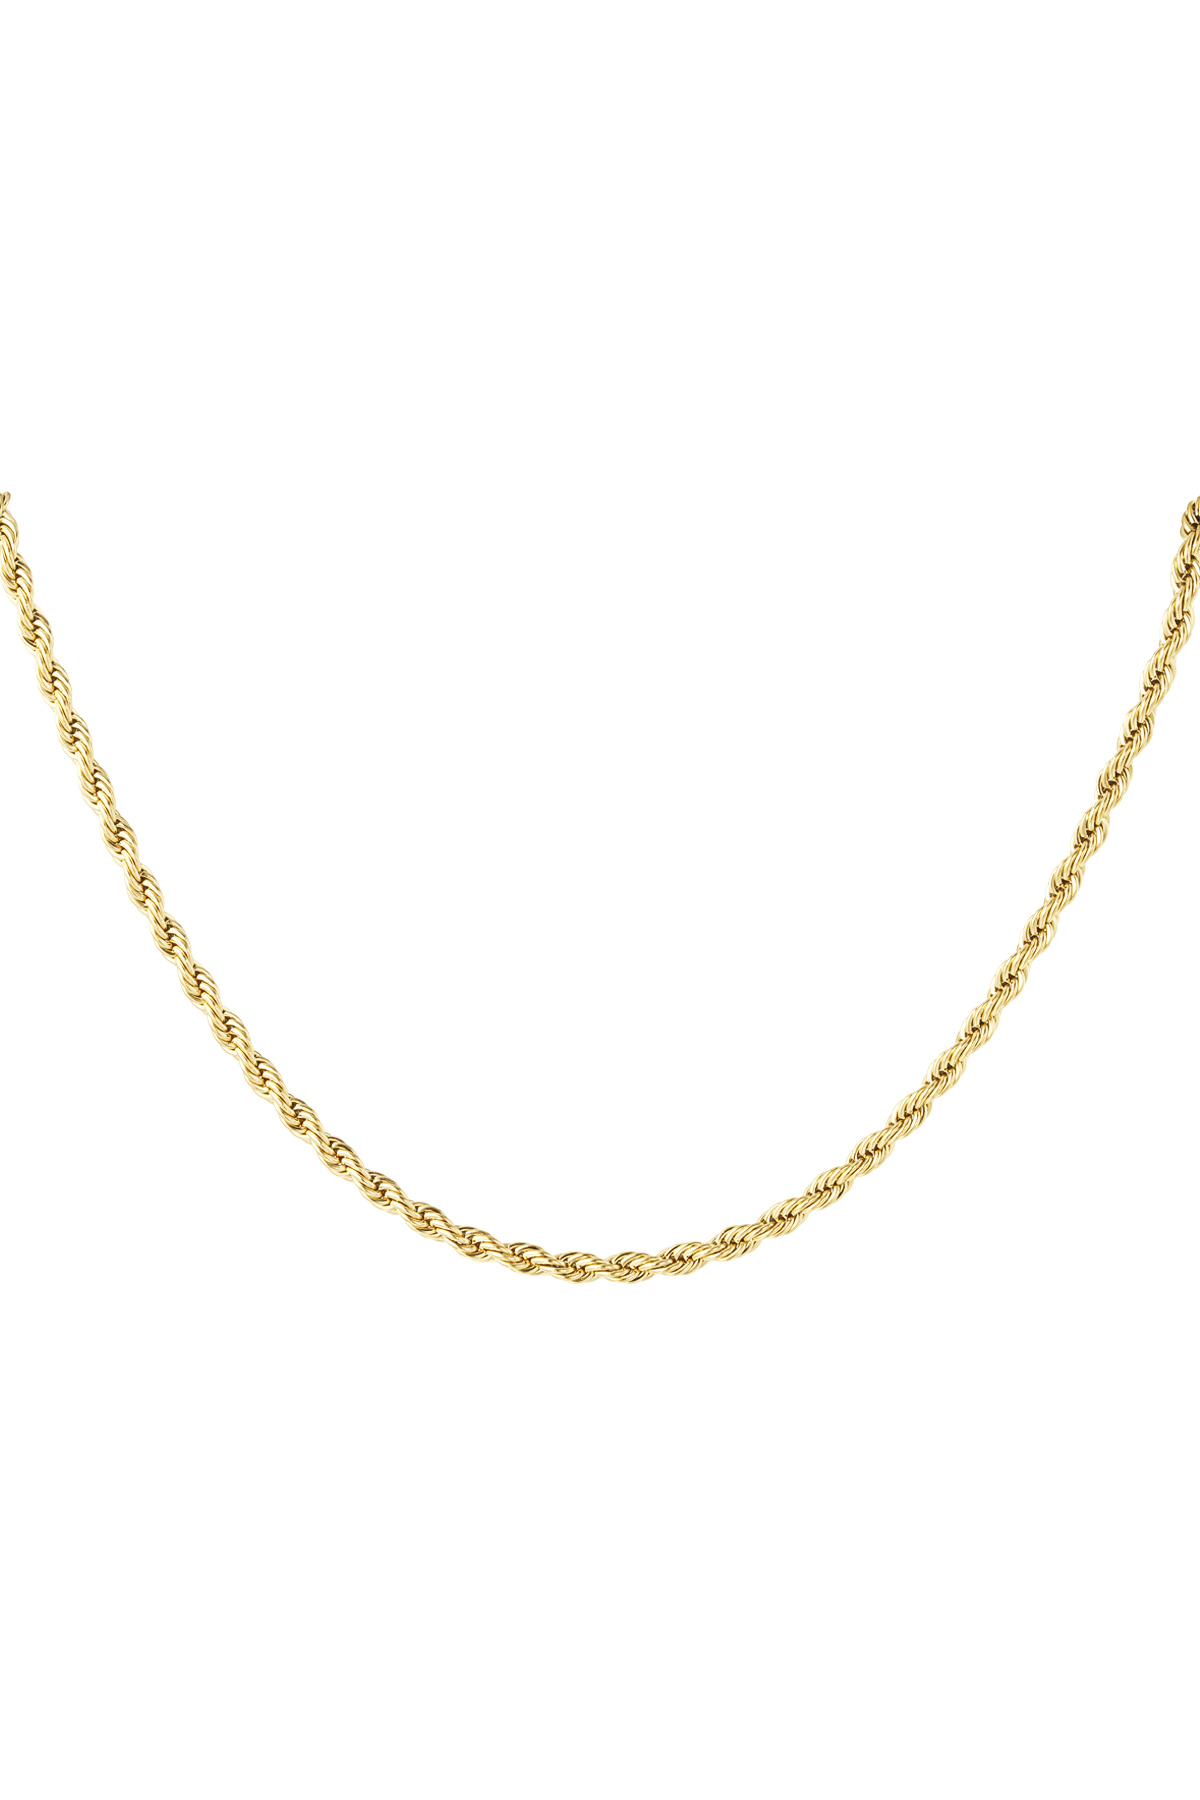 Unisex necklace twisted 40cm - gold-4.0MM 